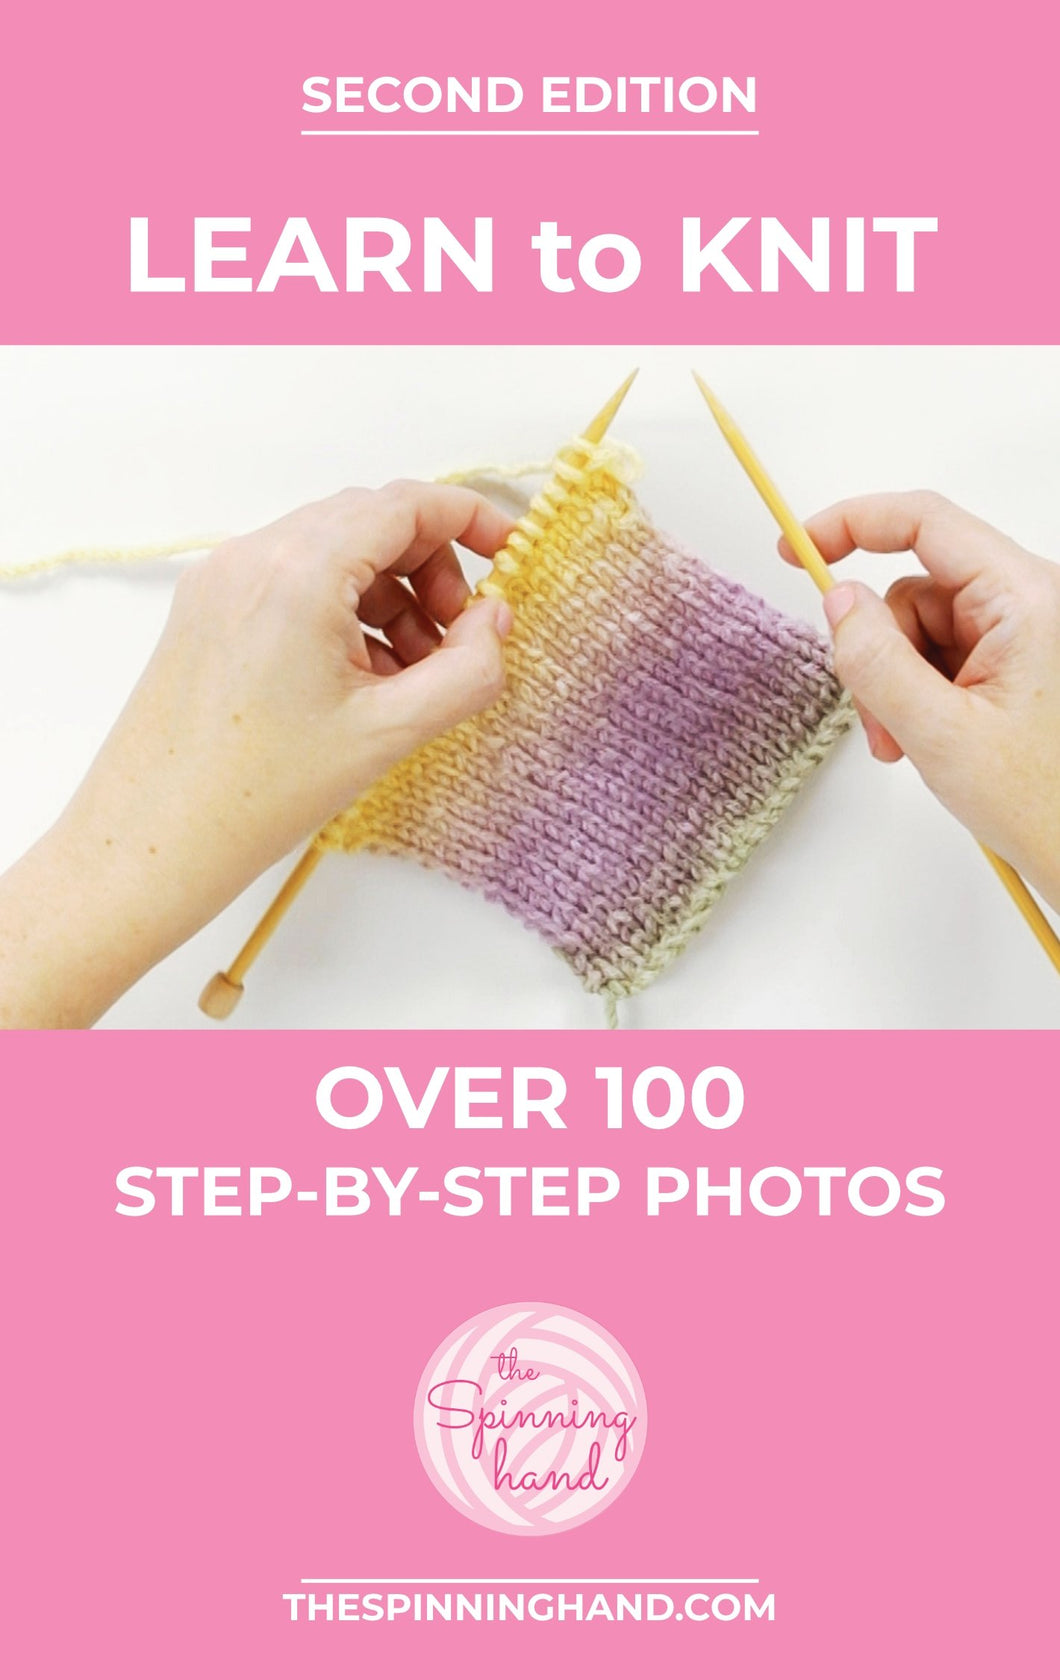 Learn to knit ebook - knitting - 100 pages knitting e-book - DIY how-to - knit ebook - PDF instant download - thespinninghand